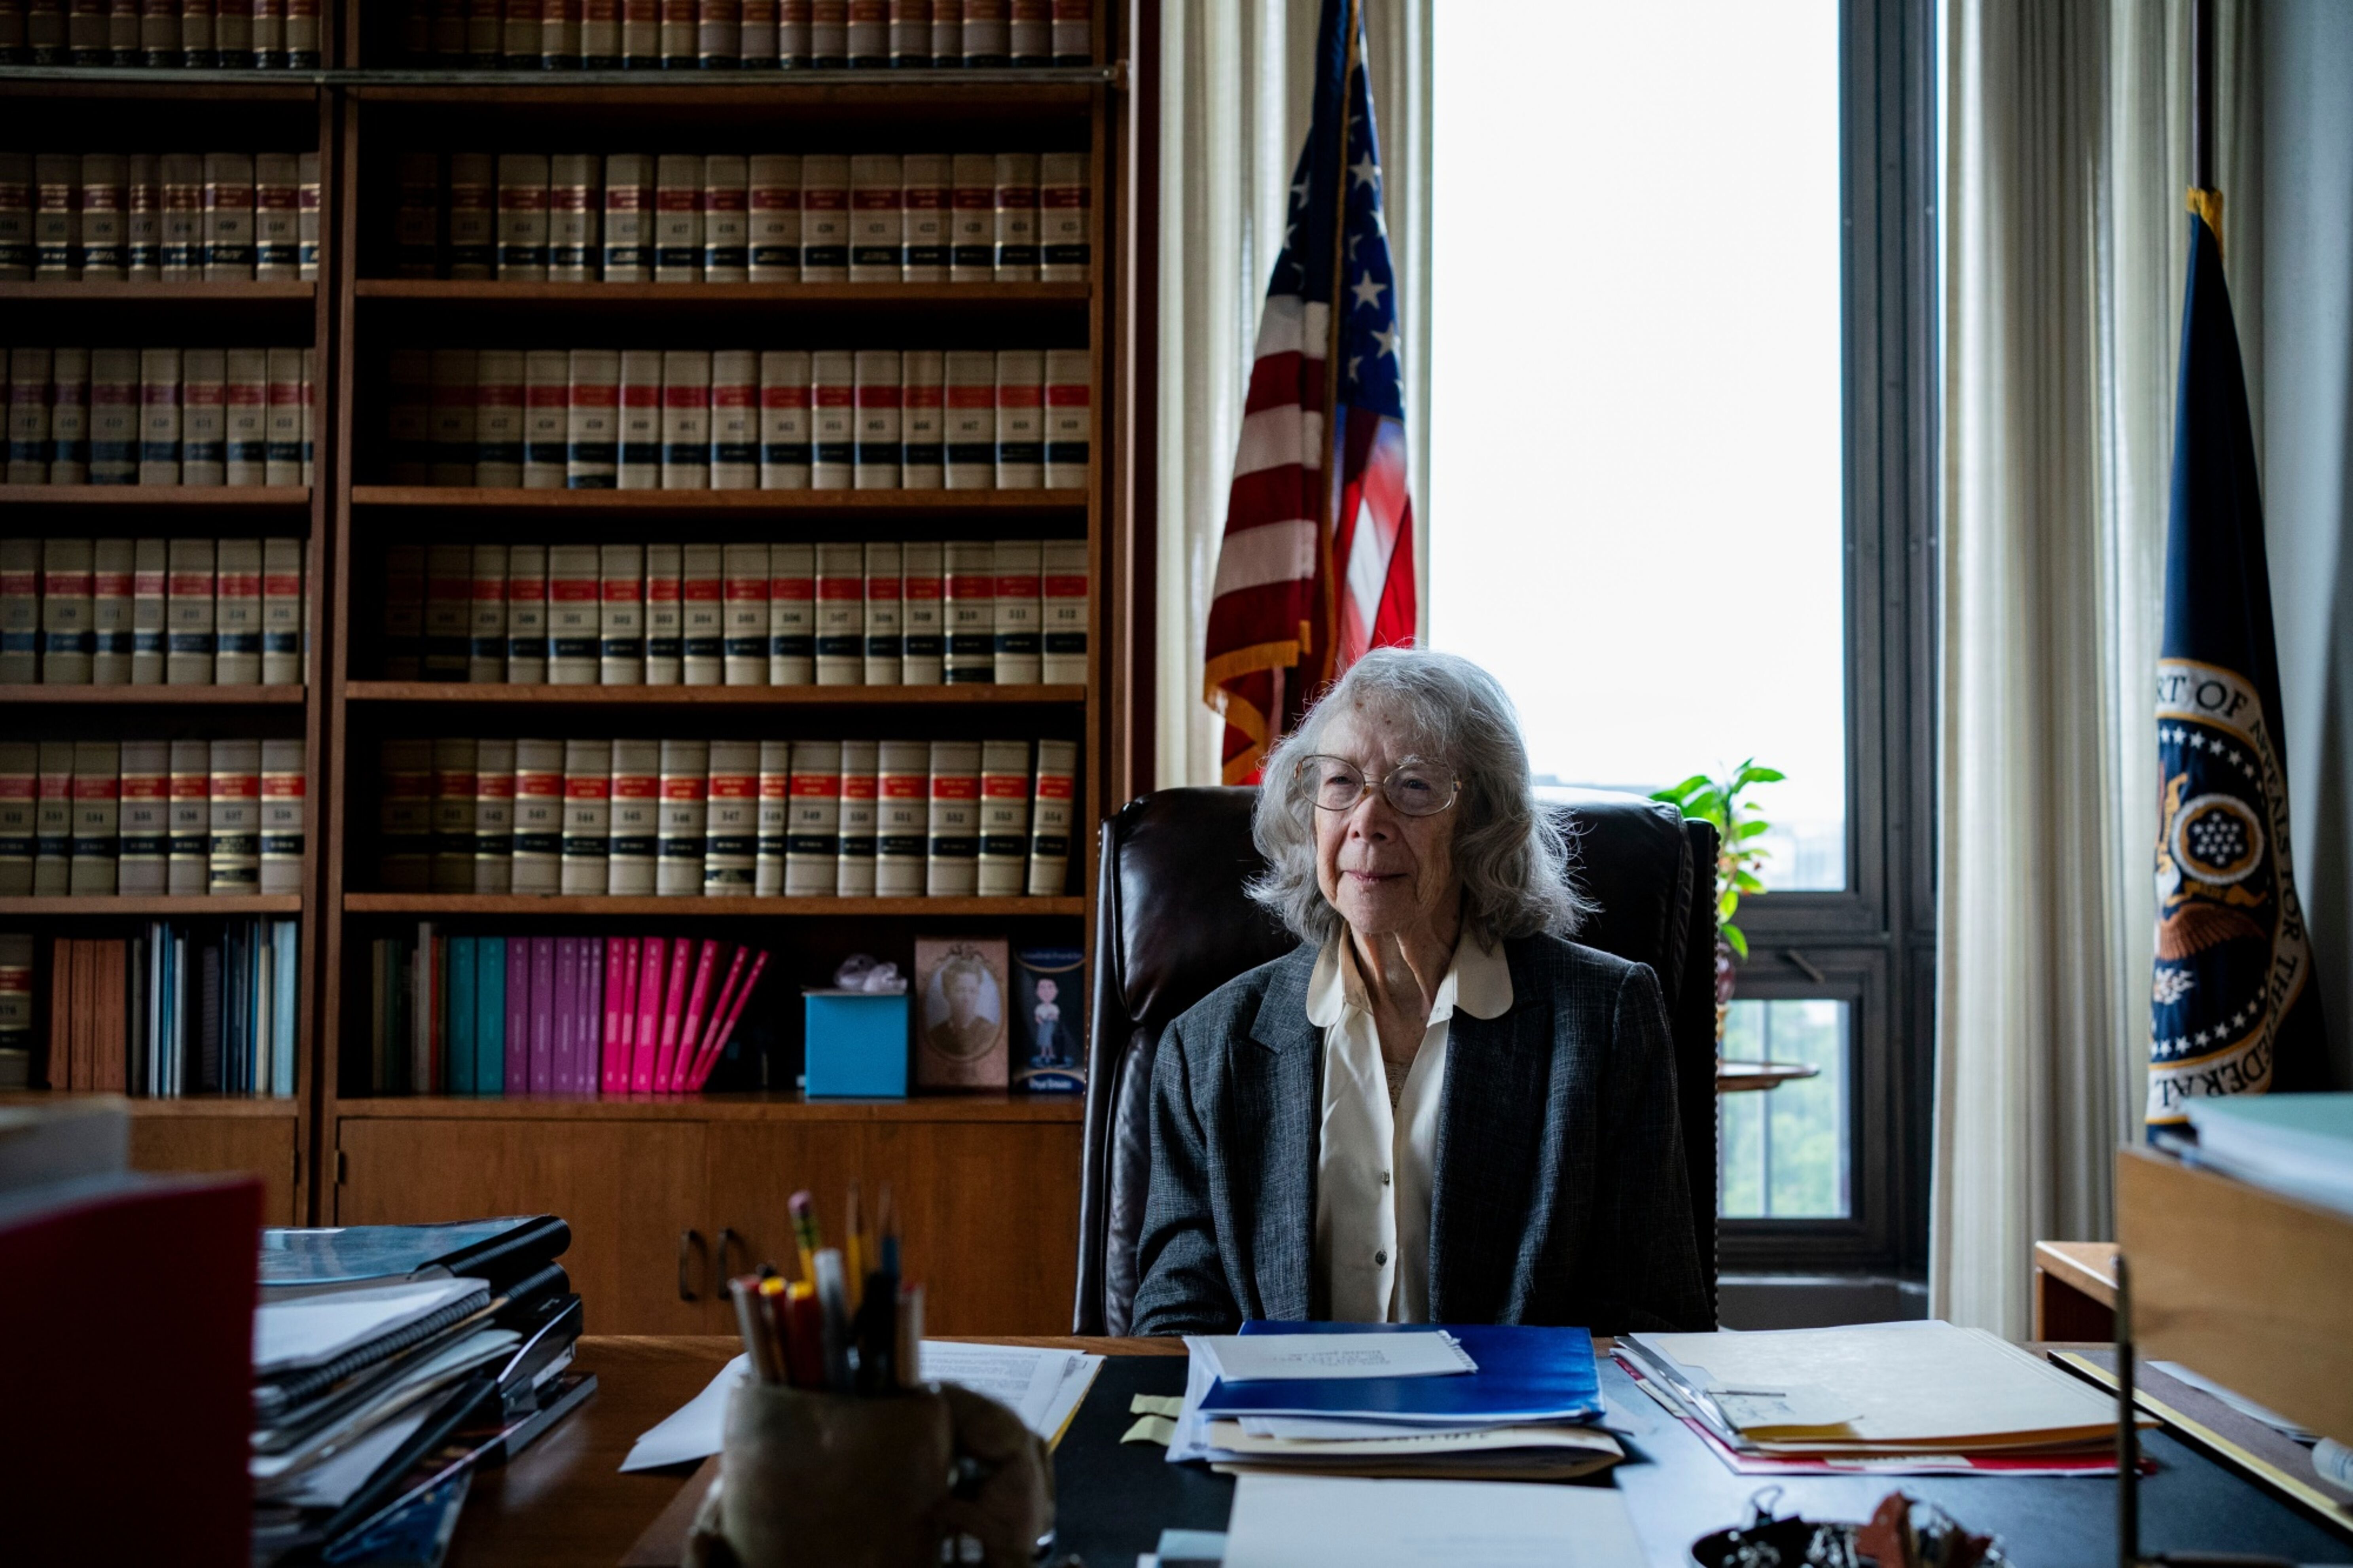 Colleagues of a 96-year-old judge are asking her…